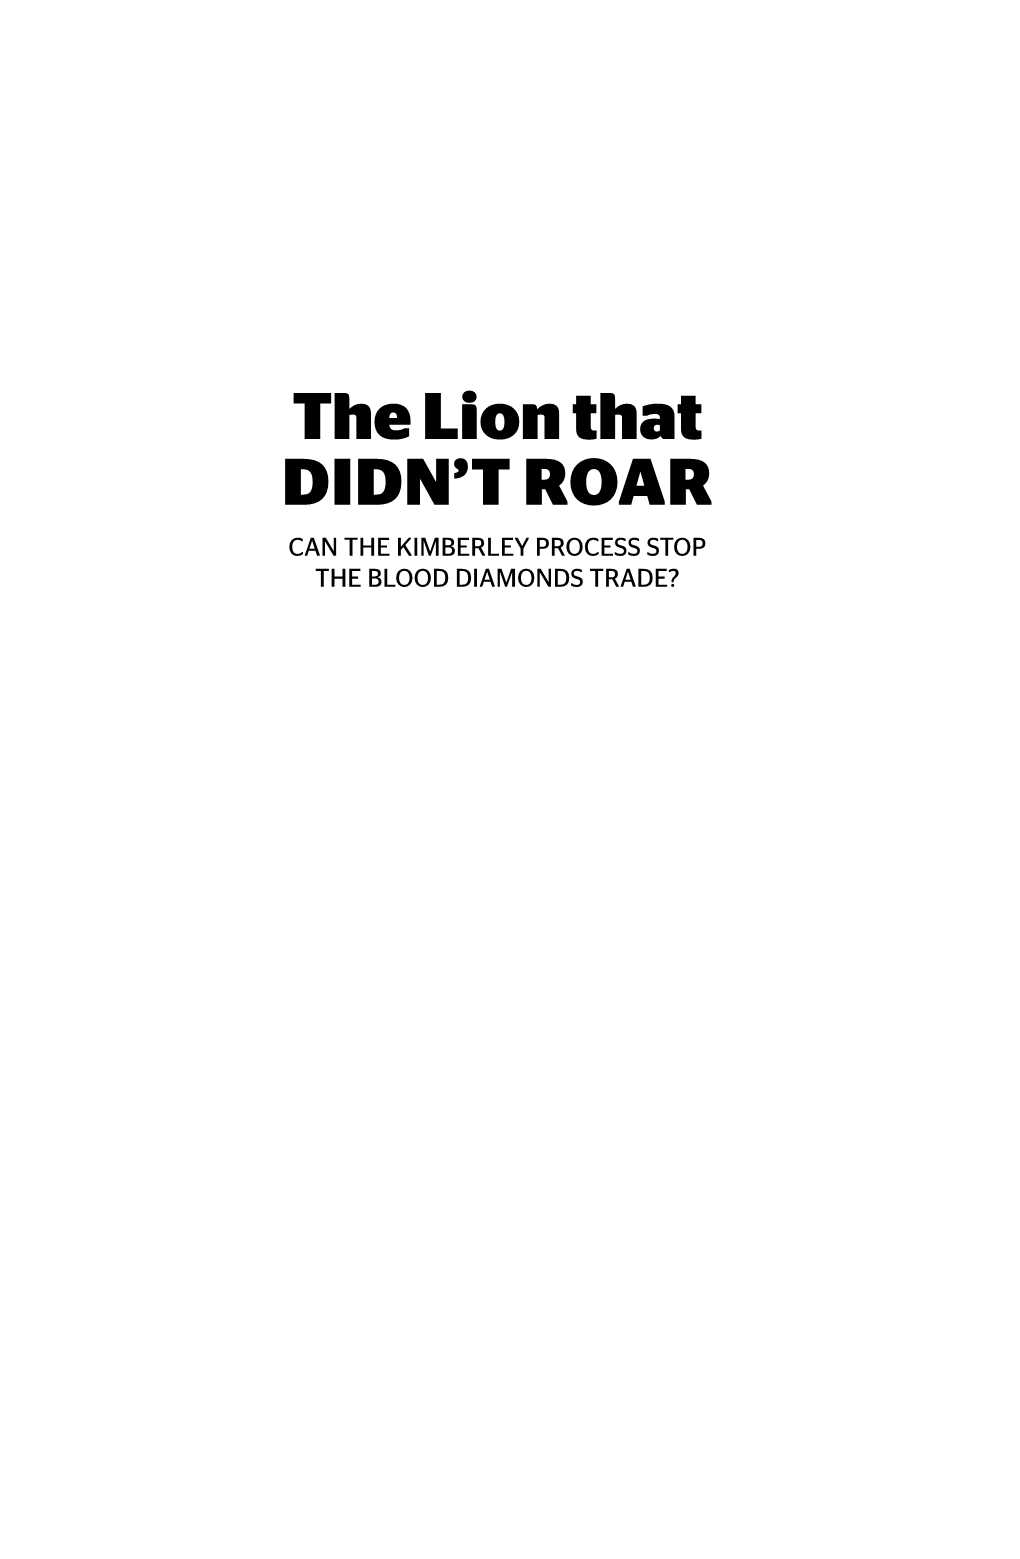 The Lion That Didn't Roar: Can the Kimberley Process